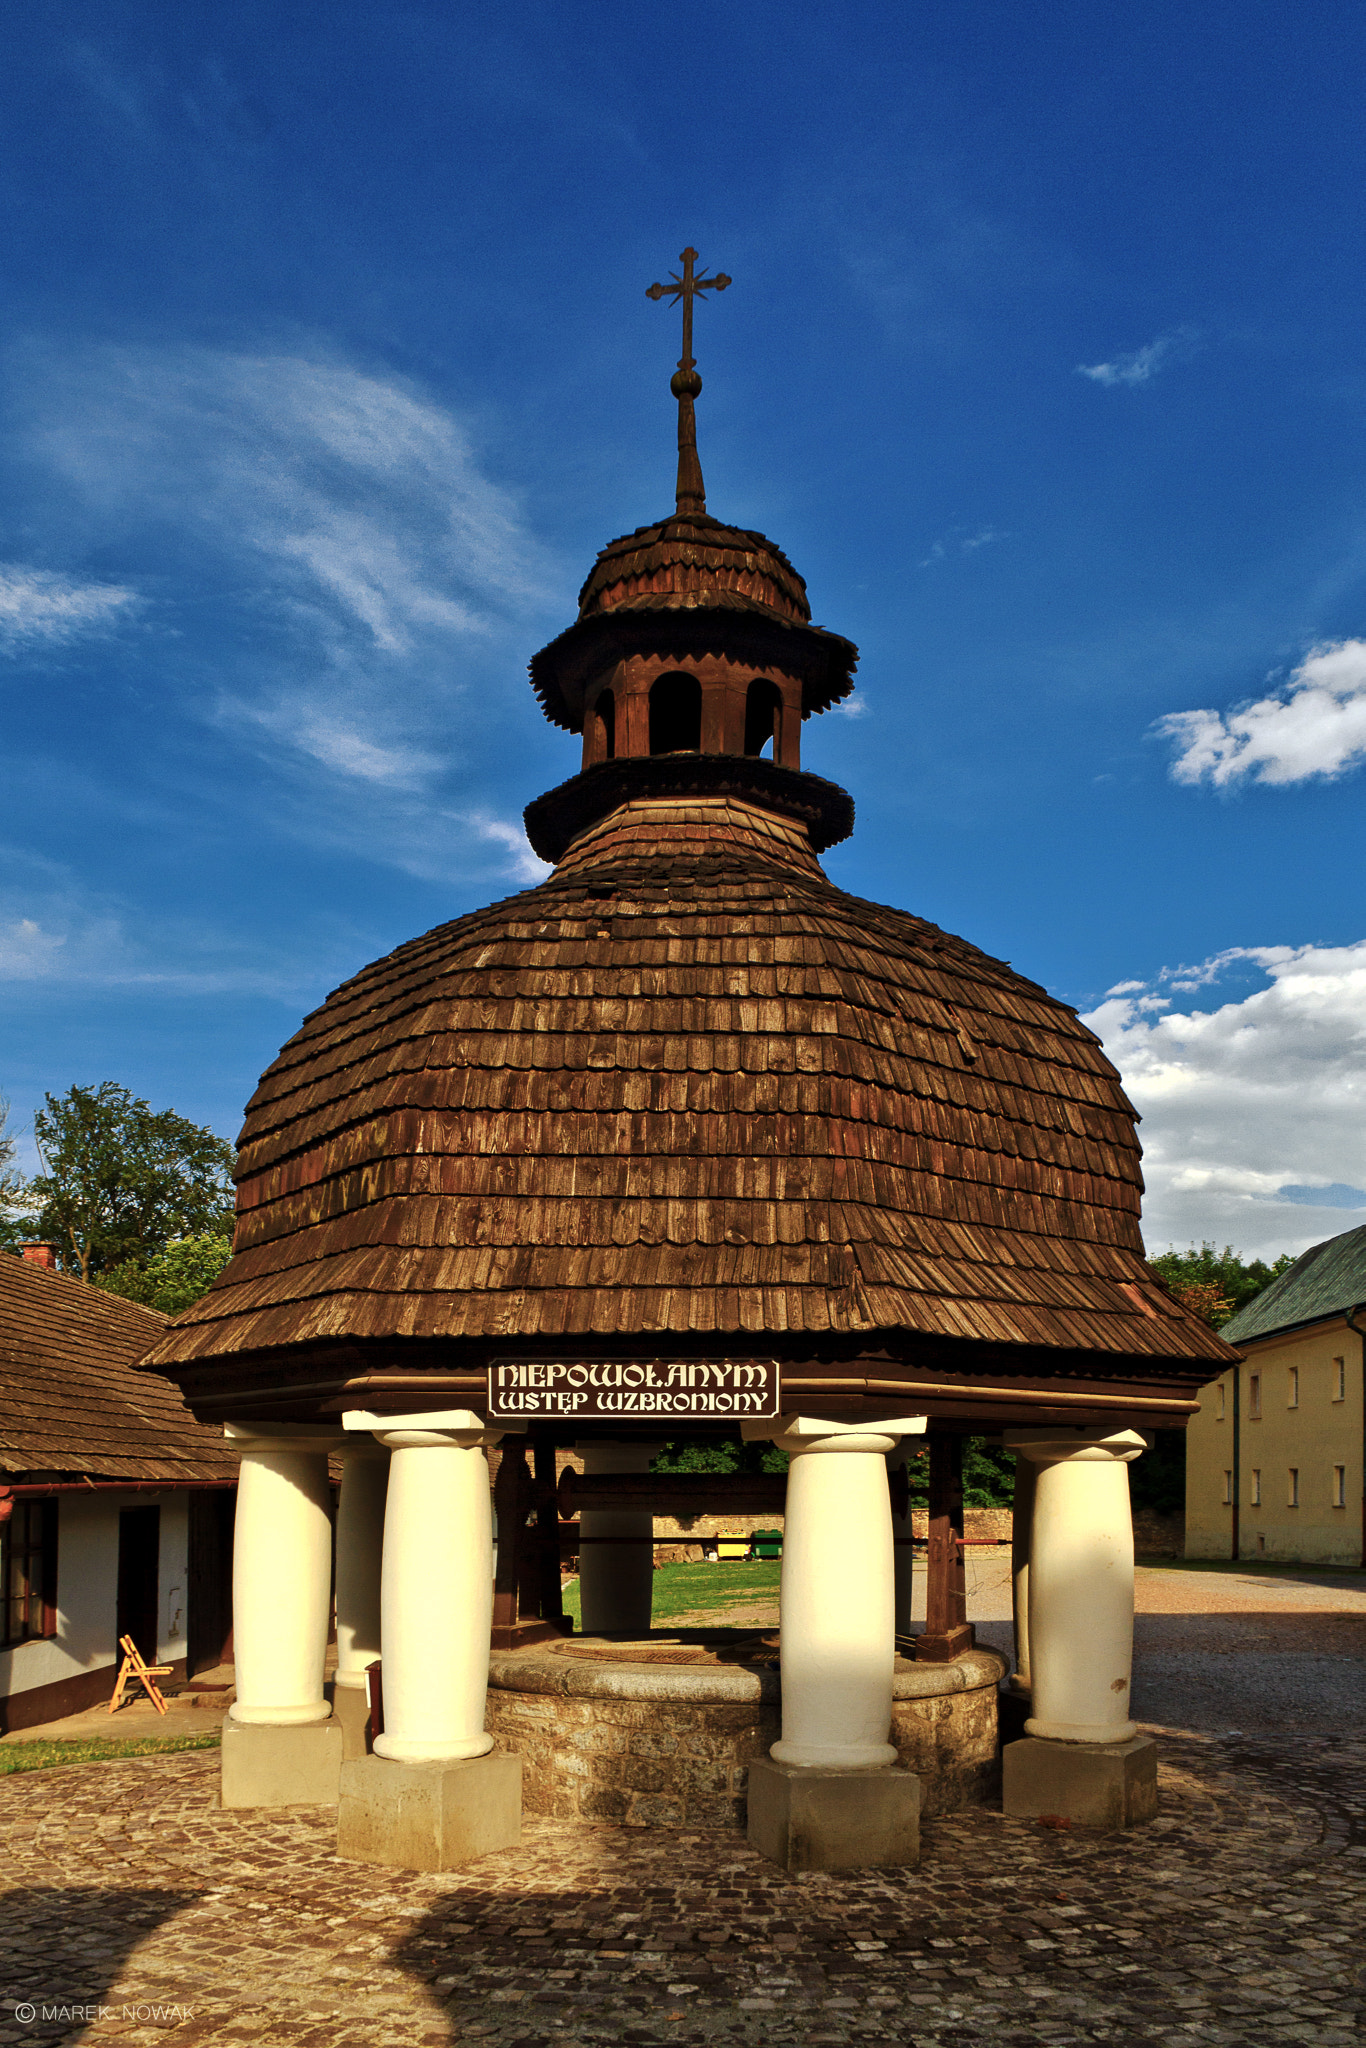 Canon EOS 7D + Sigma 17-70mm F2.8-4 DC Macro OS HSM | C sample photo. The monastery well in czerna, poland photography